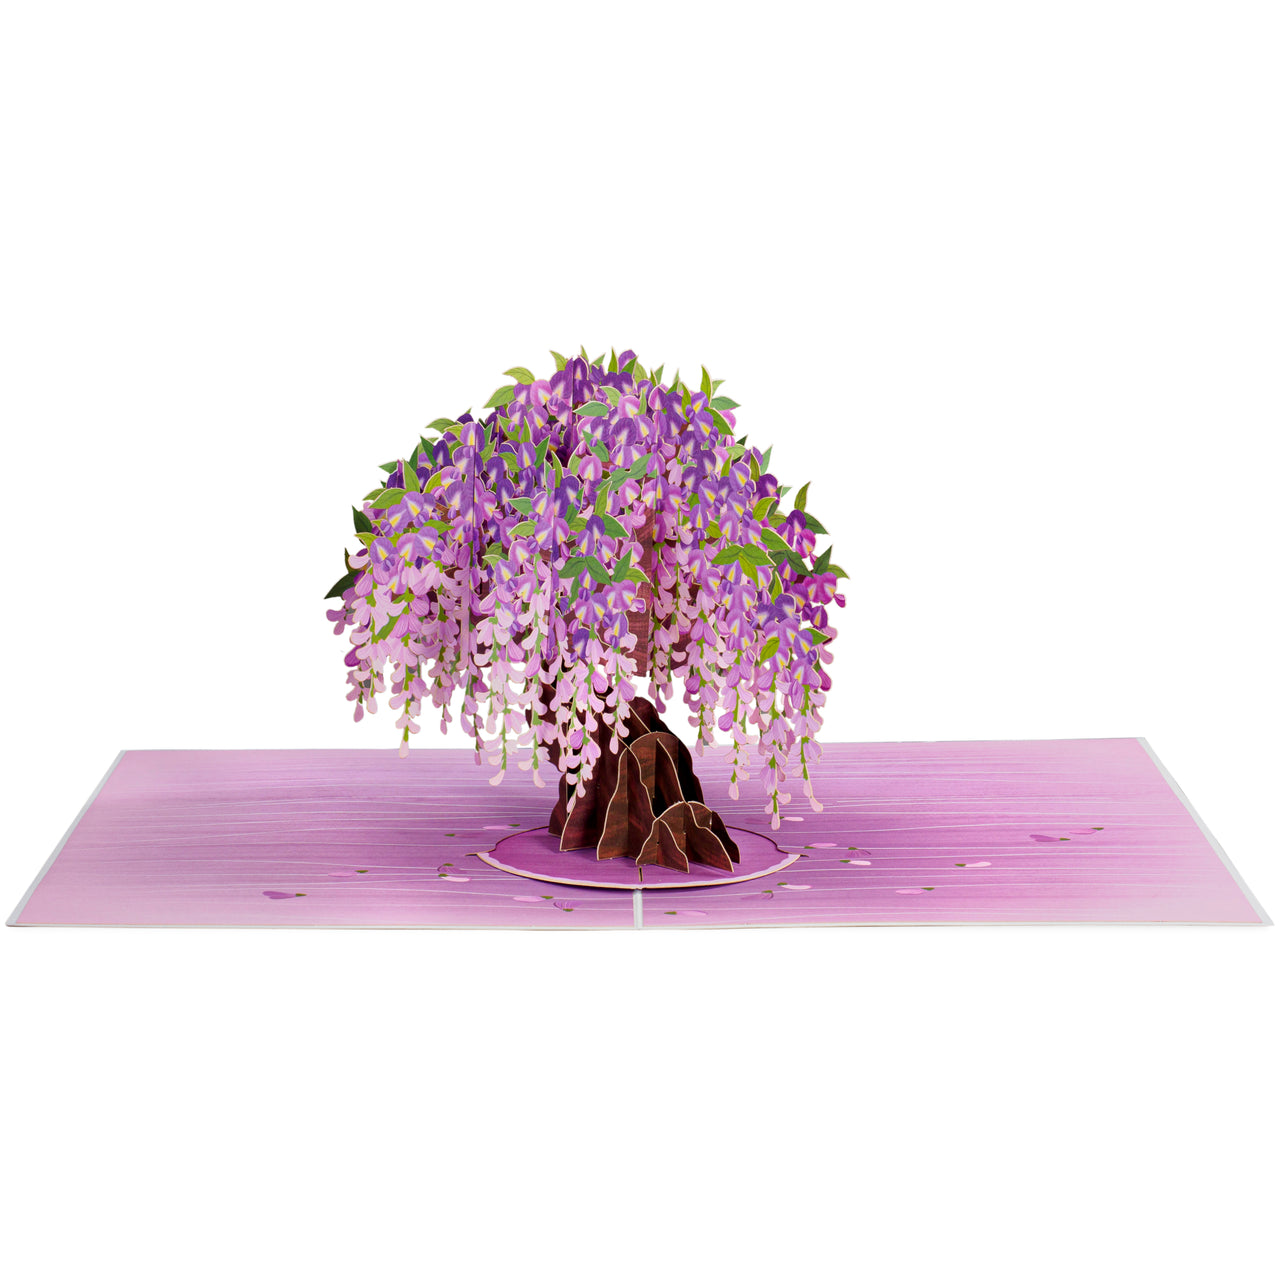 Wisteria Tree Pop Up Card- Oversized 10" x 7" Cover